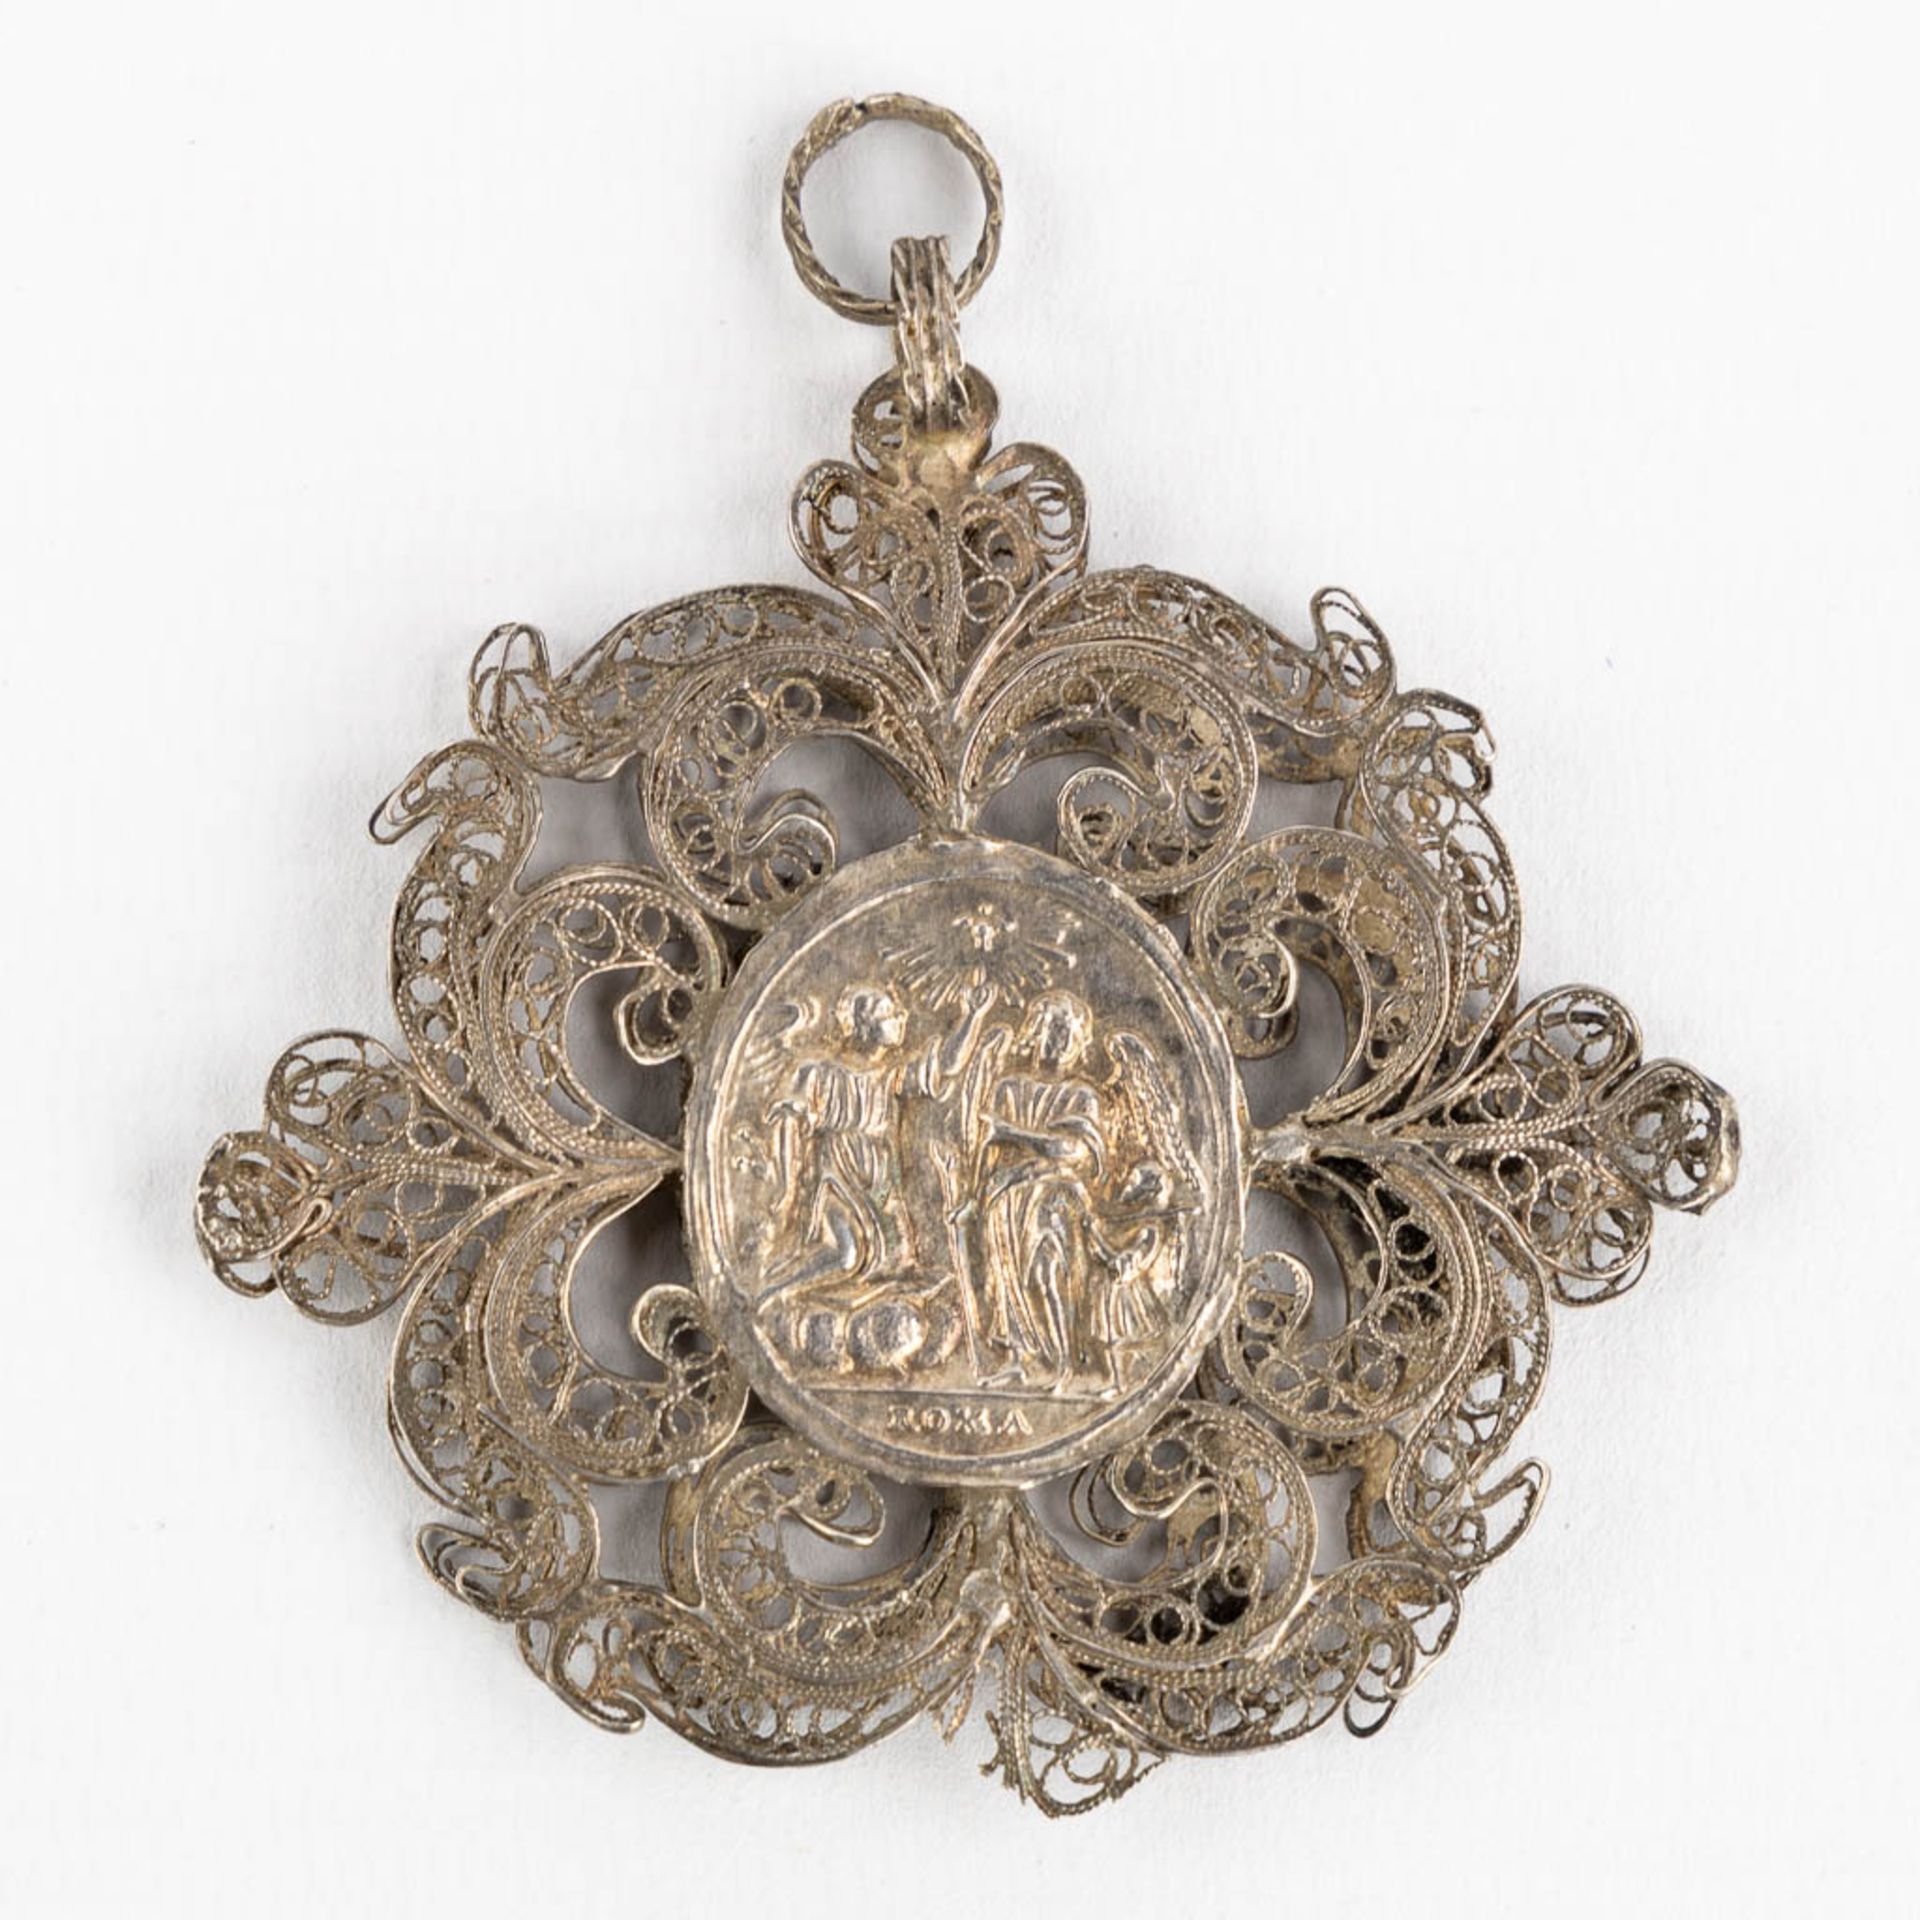 A collection of silver brooches, pendants and bracelets, Filigrane silver. 90g. (H:7 cm) - Image 7 of 8